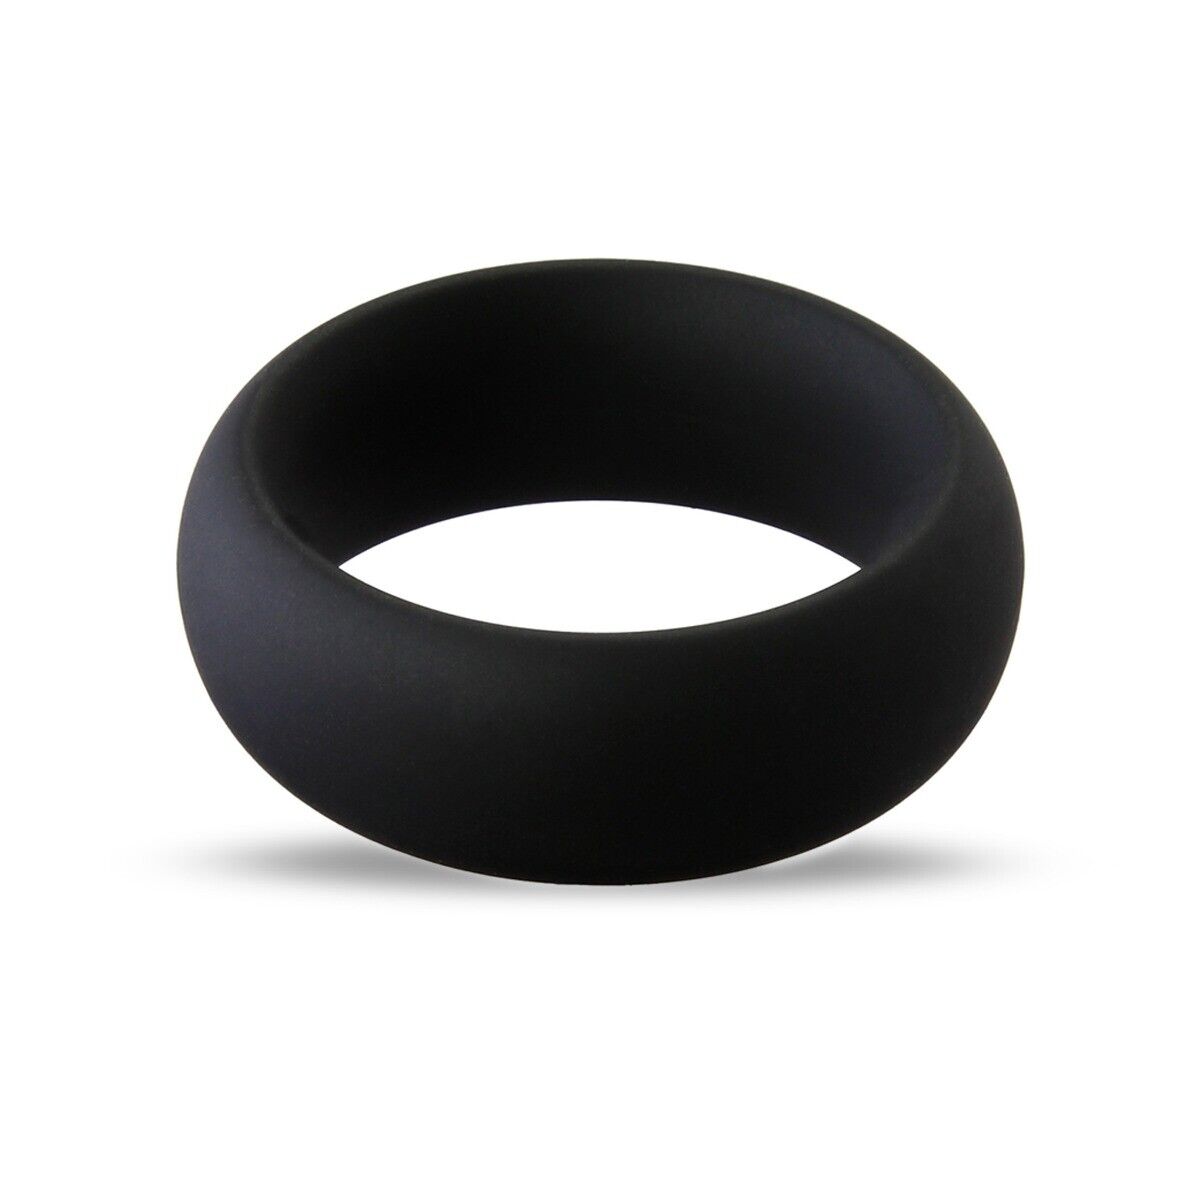 Stretchy Silicone Thick Penis Cock Ring Band Delay Prolong Sex Toys for Men